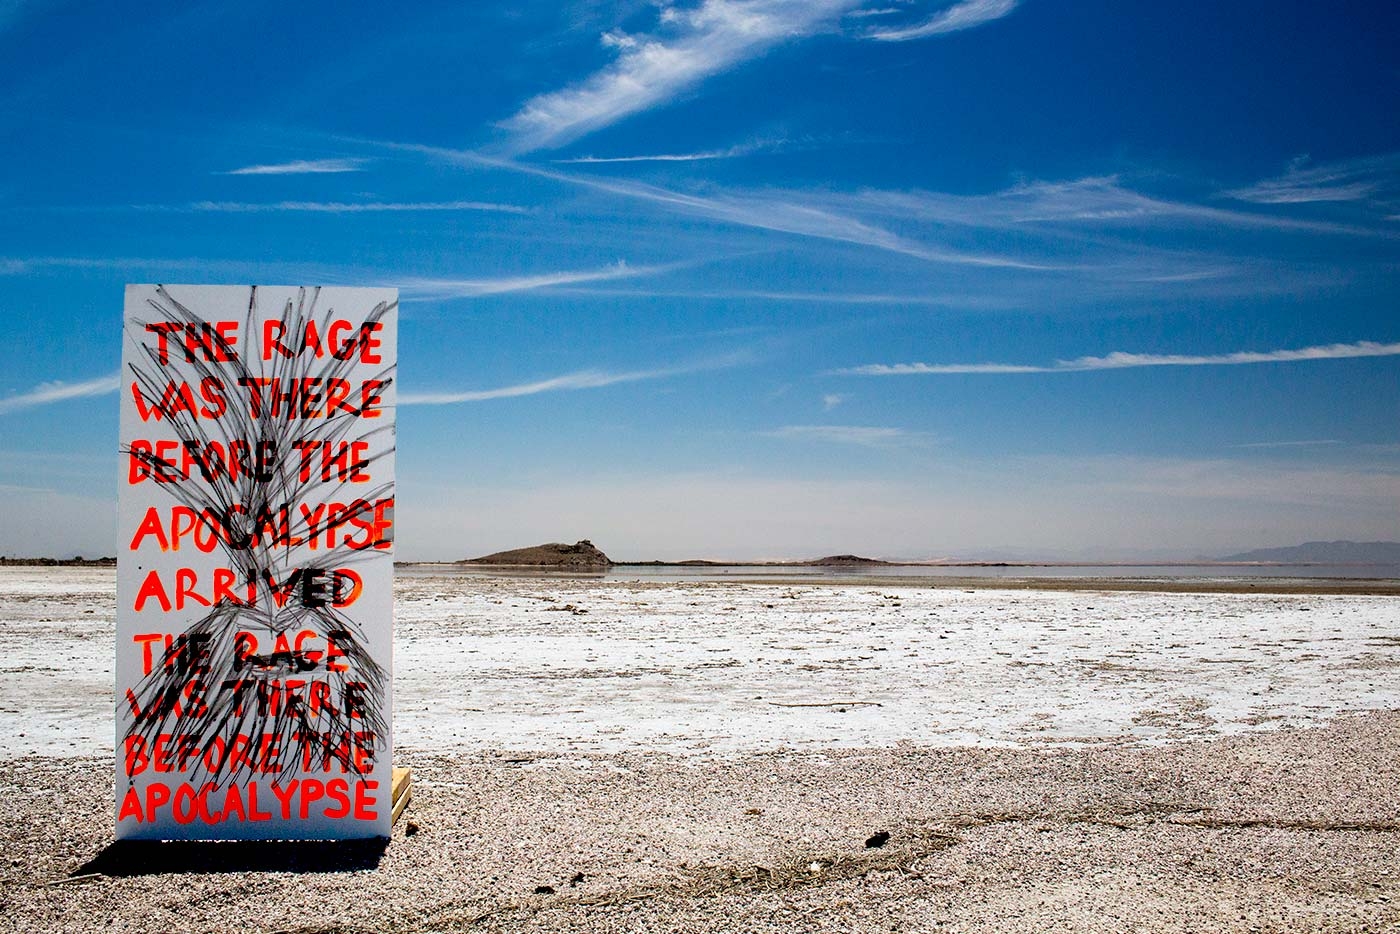 image by Caitlin Berrigan of a written sign in the middle of the desert